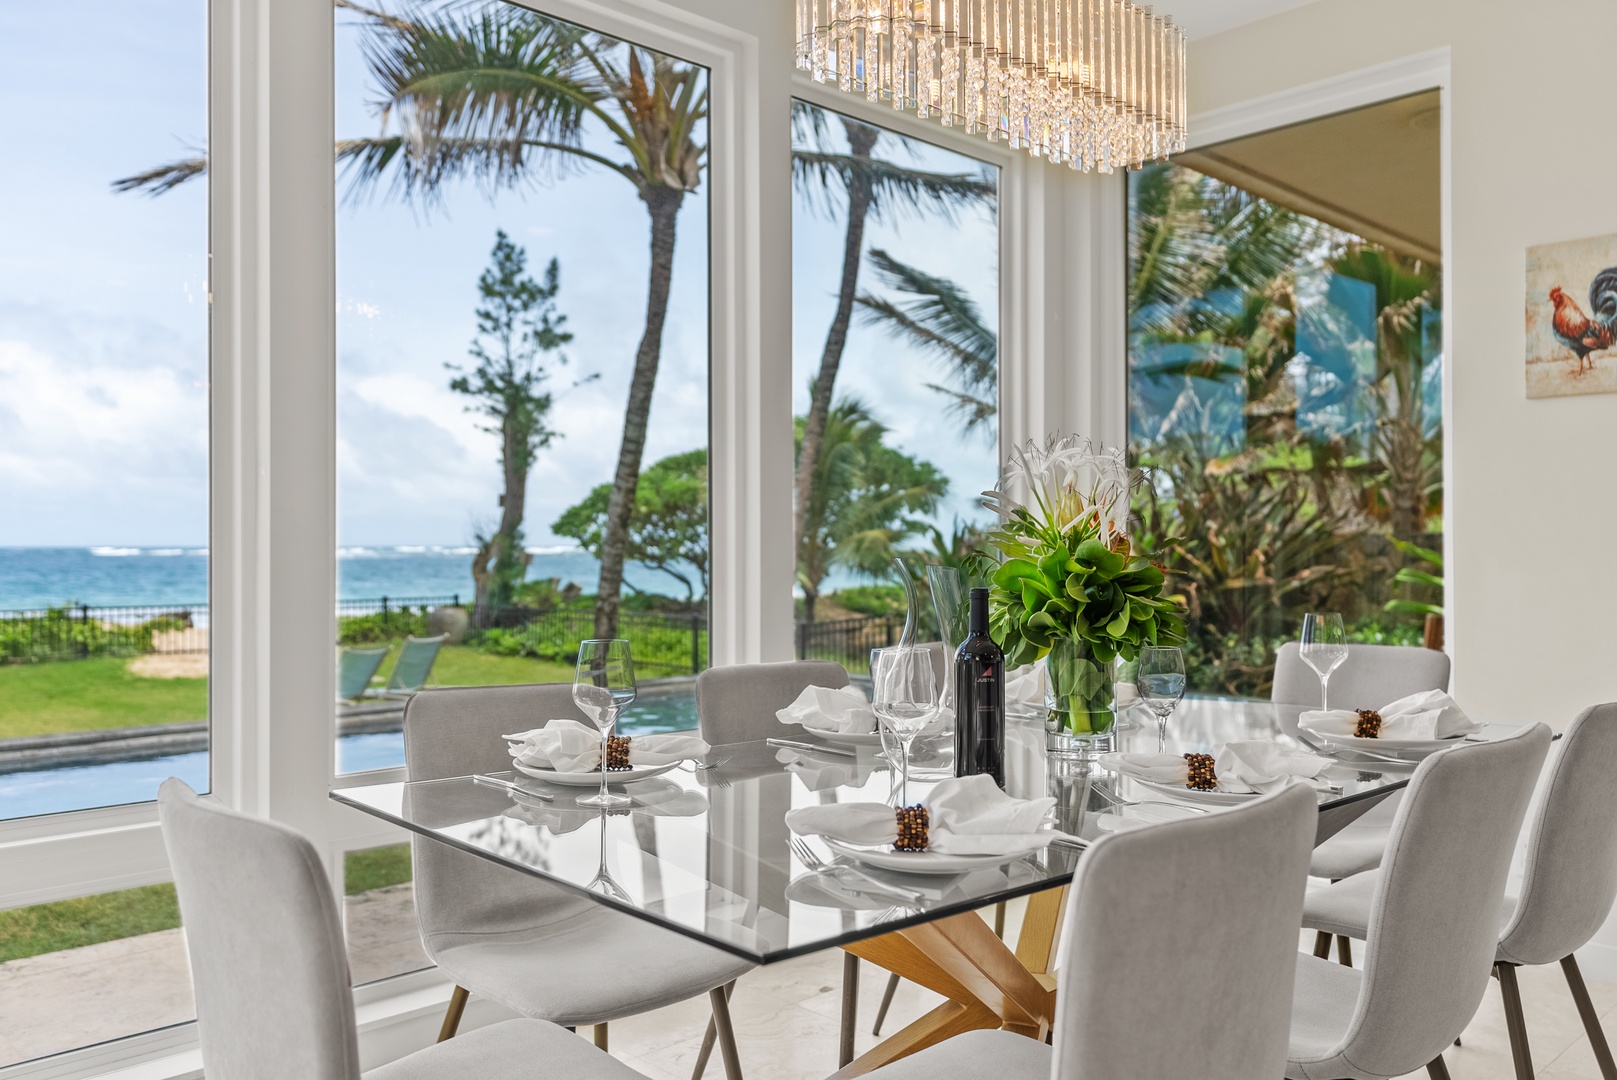 Laie Vacation Rentals, Laie Beachfront Estate - Dine with a view in the elegant dining area with large windows overlooking the ocean.